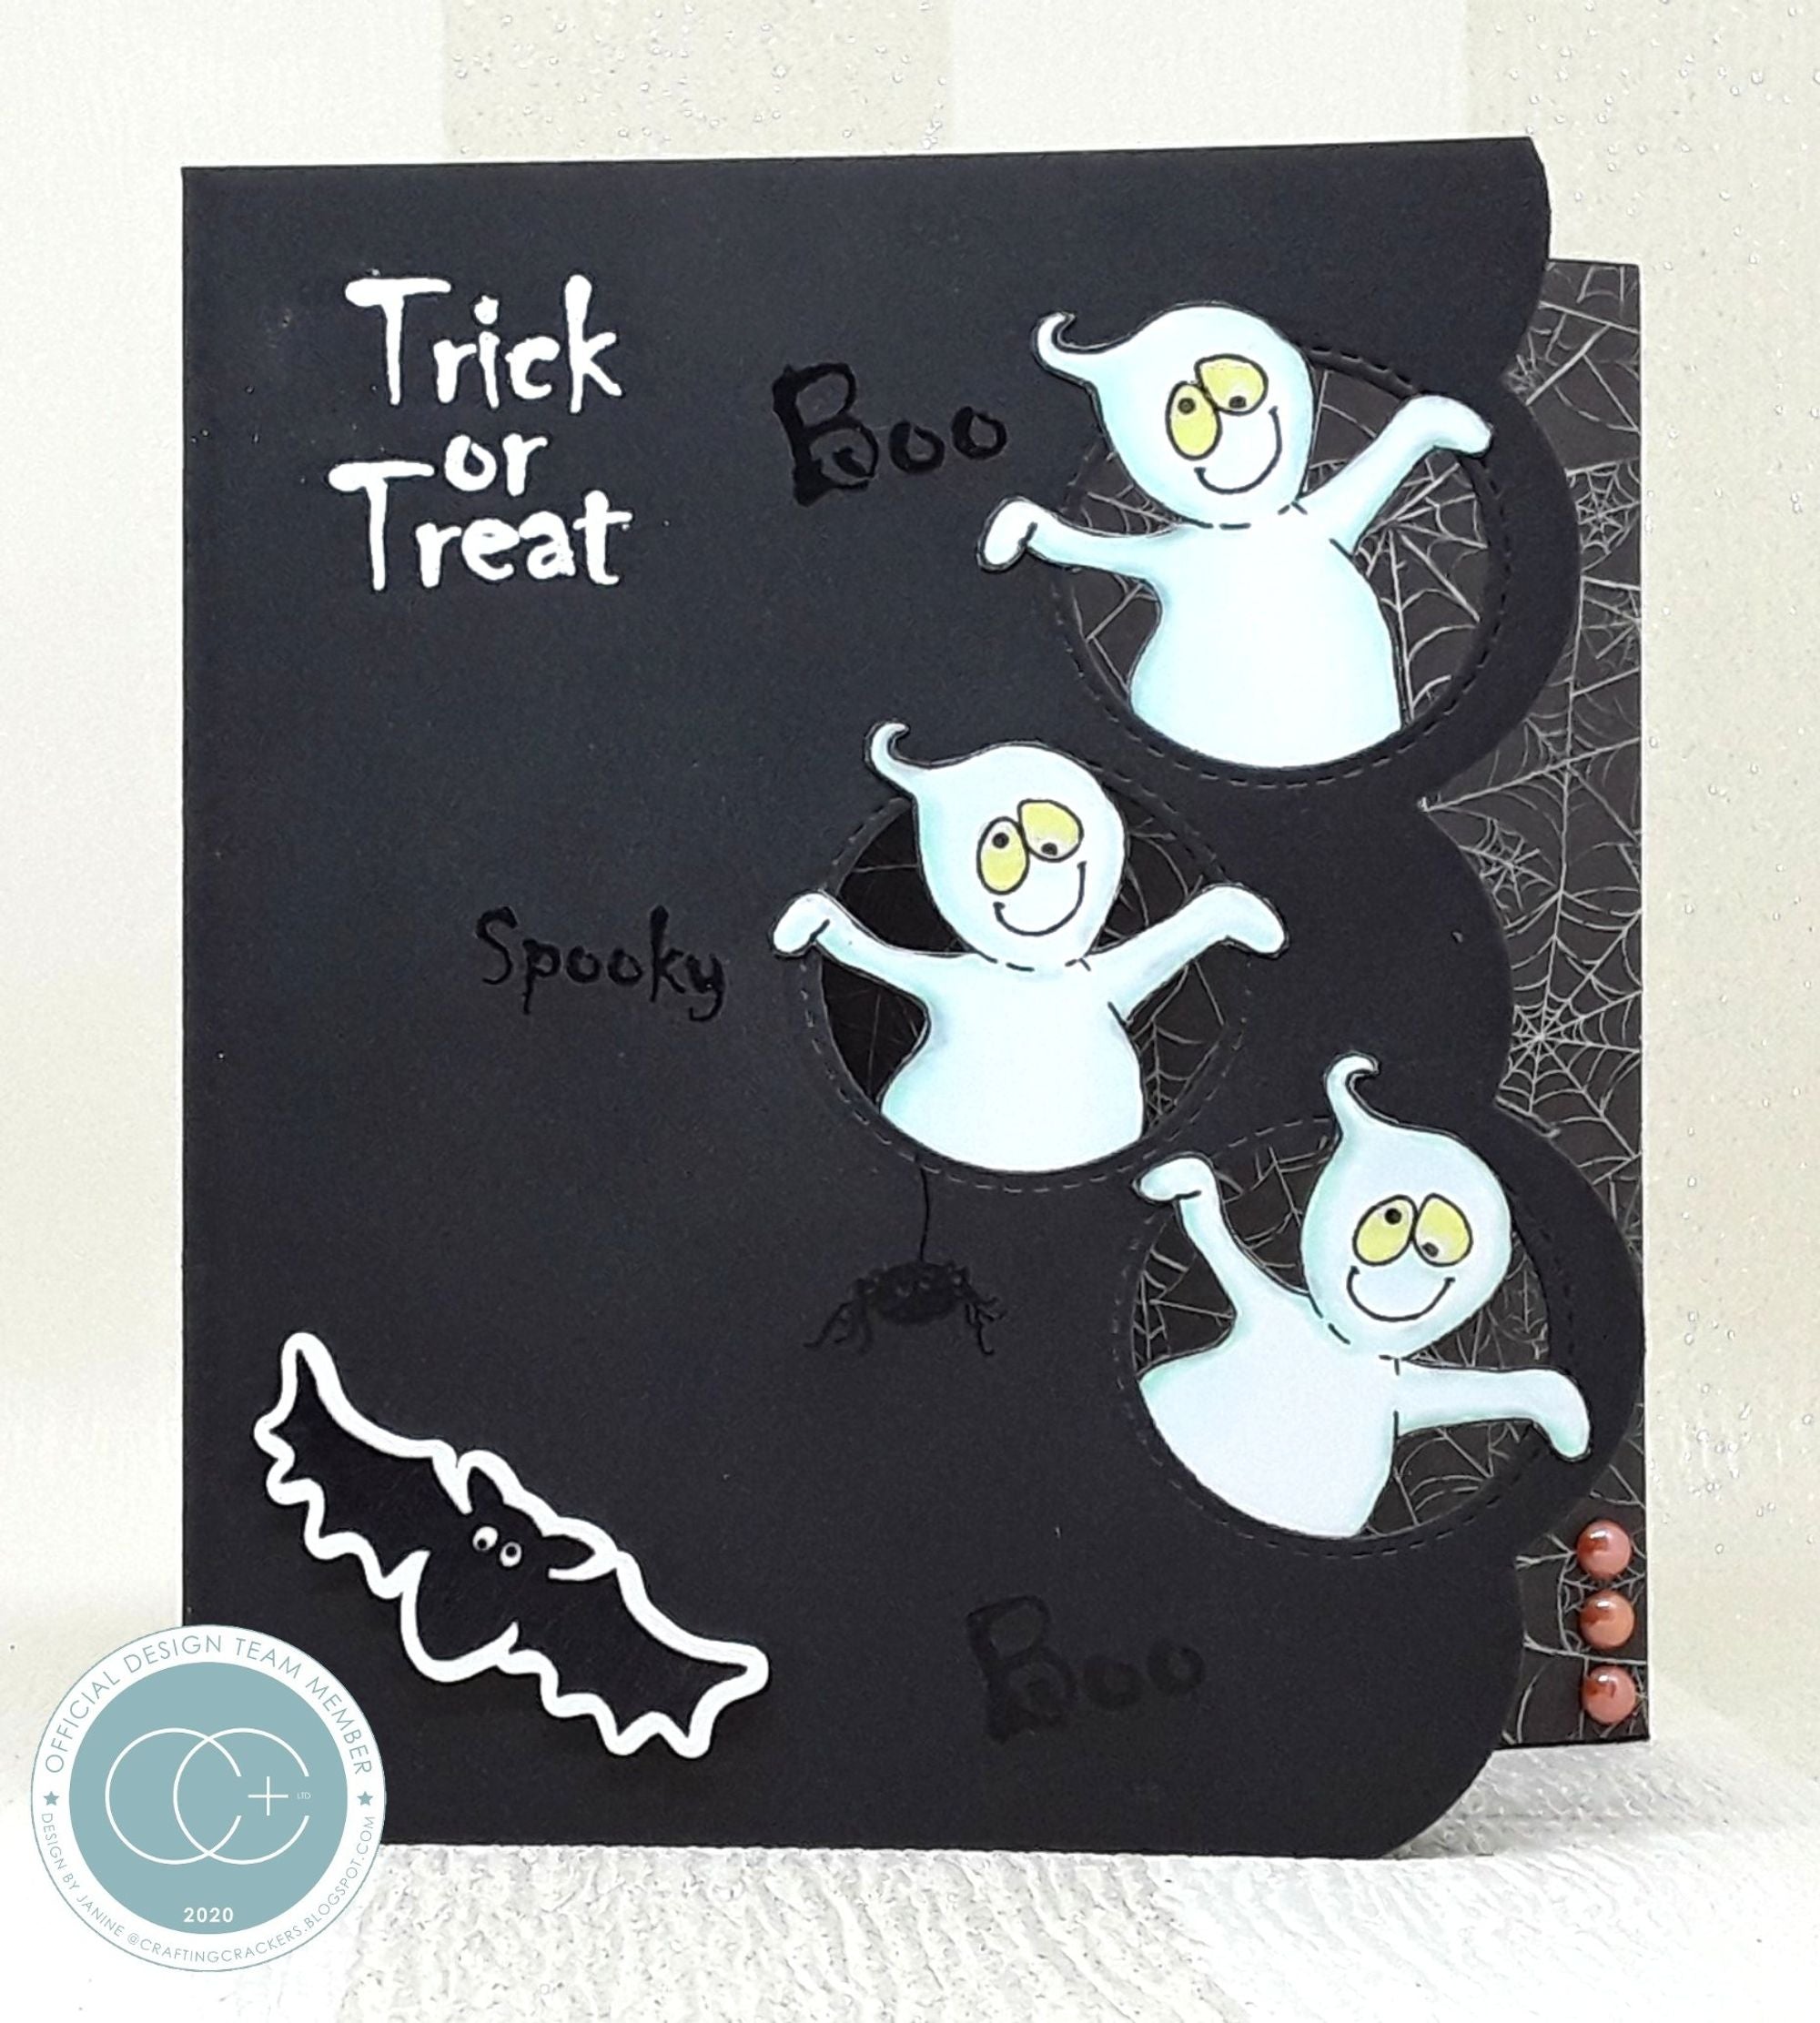 Happy Haunting - Puffy Stickers